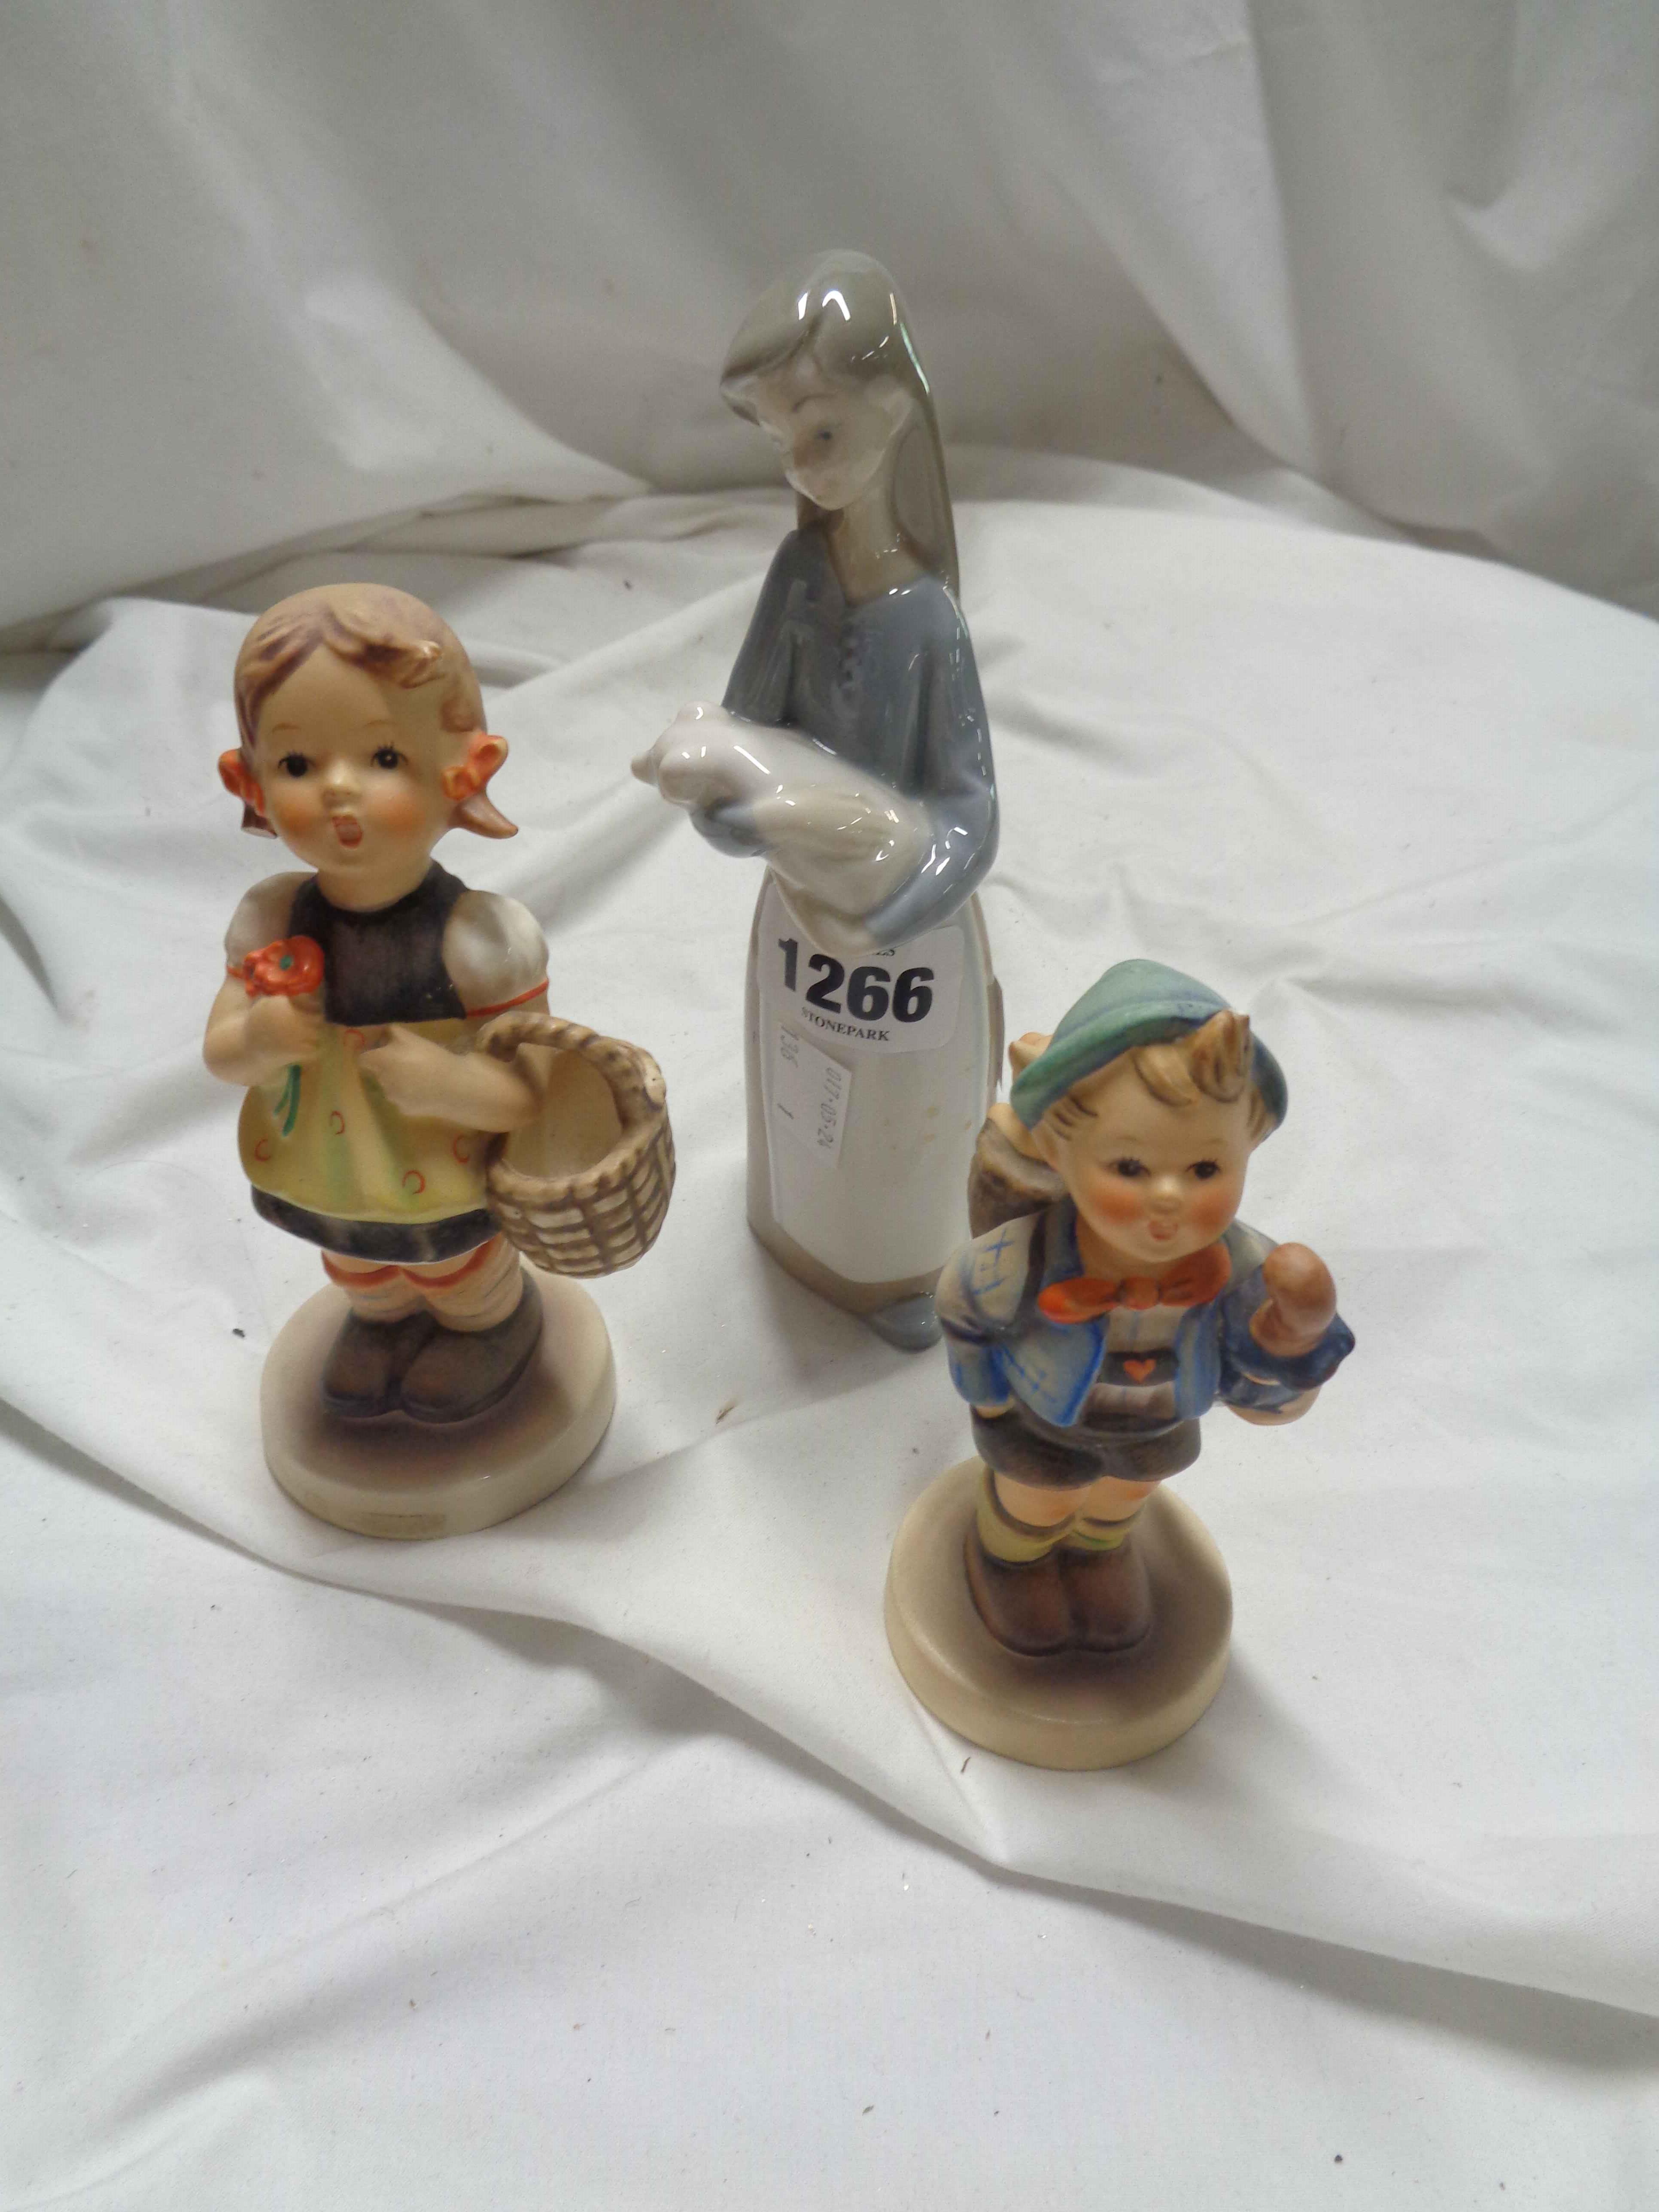 A Lladro figurine, depicting a girl holding a piglet - sold with two Hummel figures - one a/f